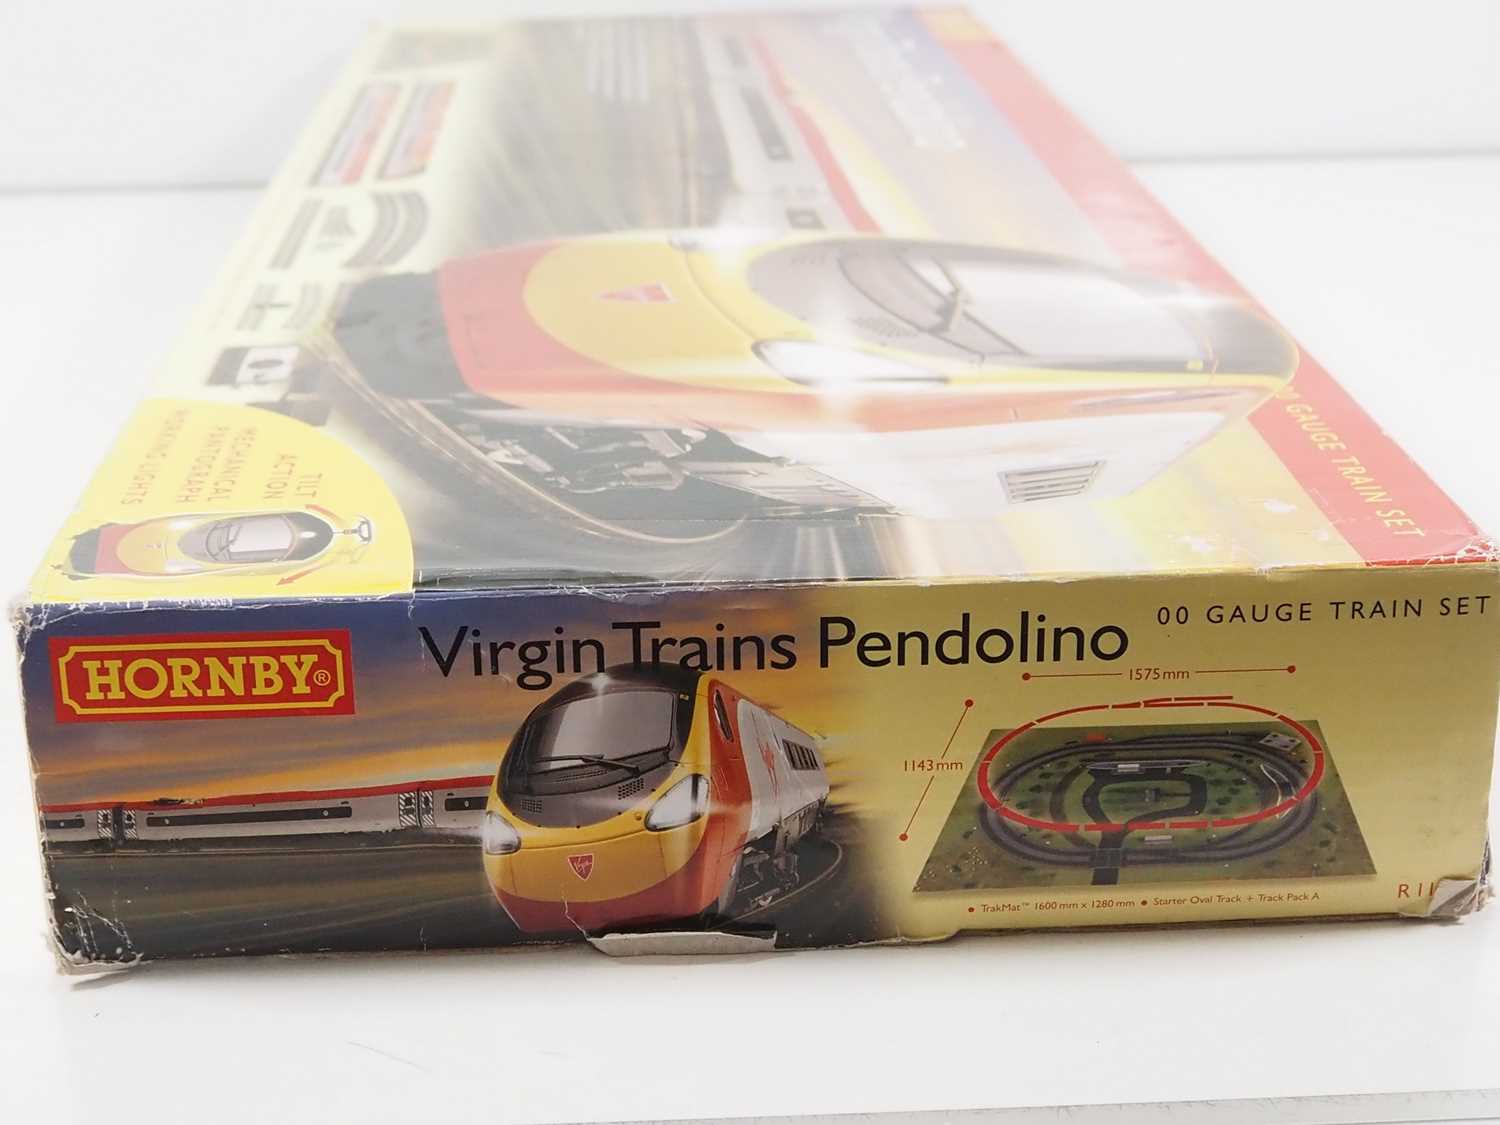 A HORNBY R1134 OO gauge 'Virgin Trains Pendolino' train set comprising a 4-car train and track, - Image 7 of 7